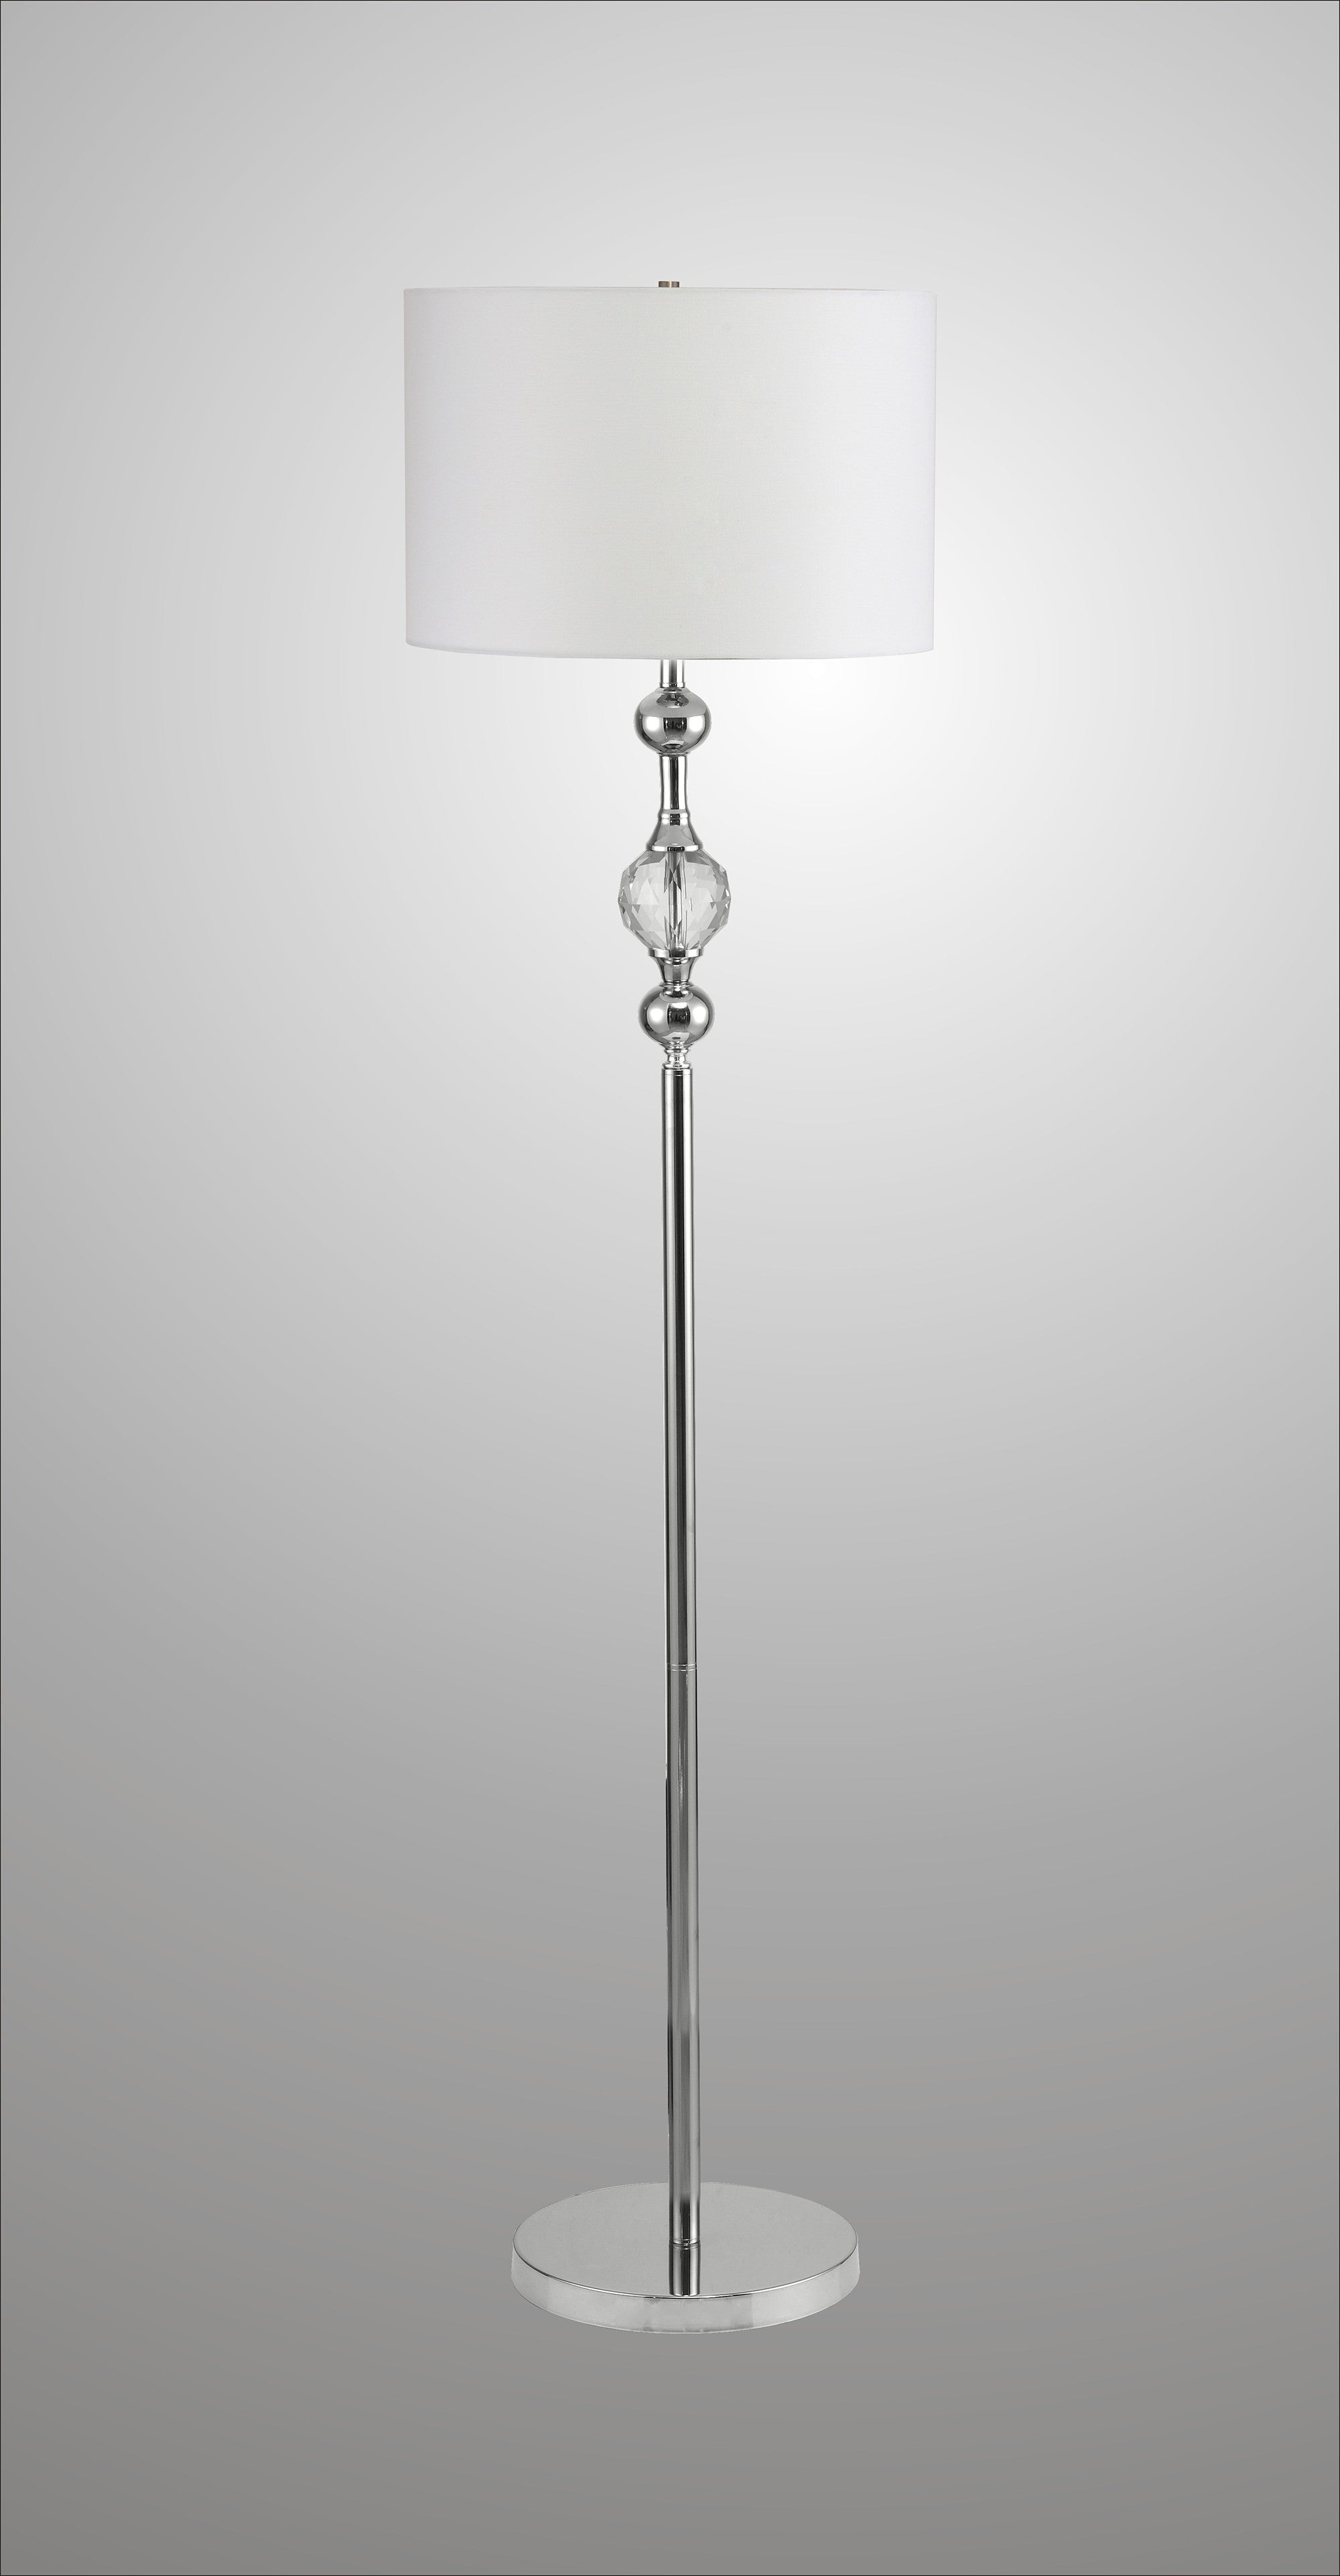 63" Chrome and Crystal Orb Shaped Floor Lamp With White Drum Shade